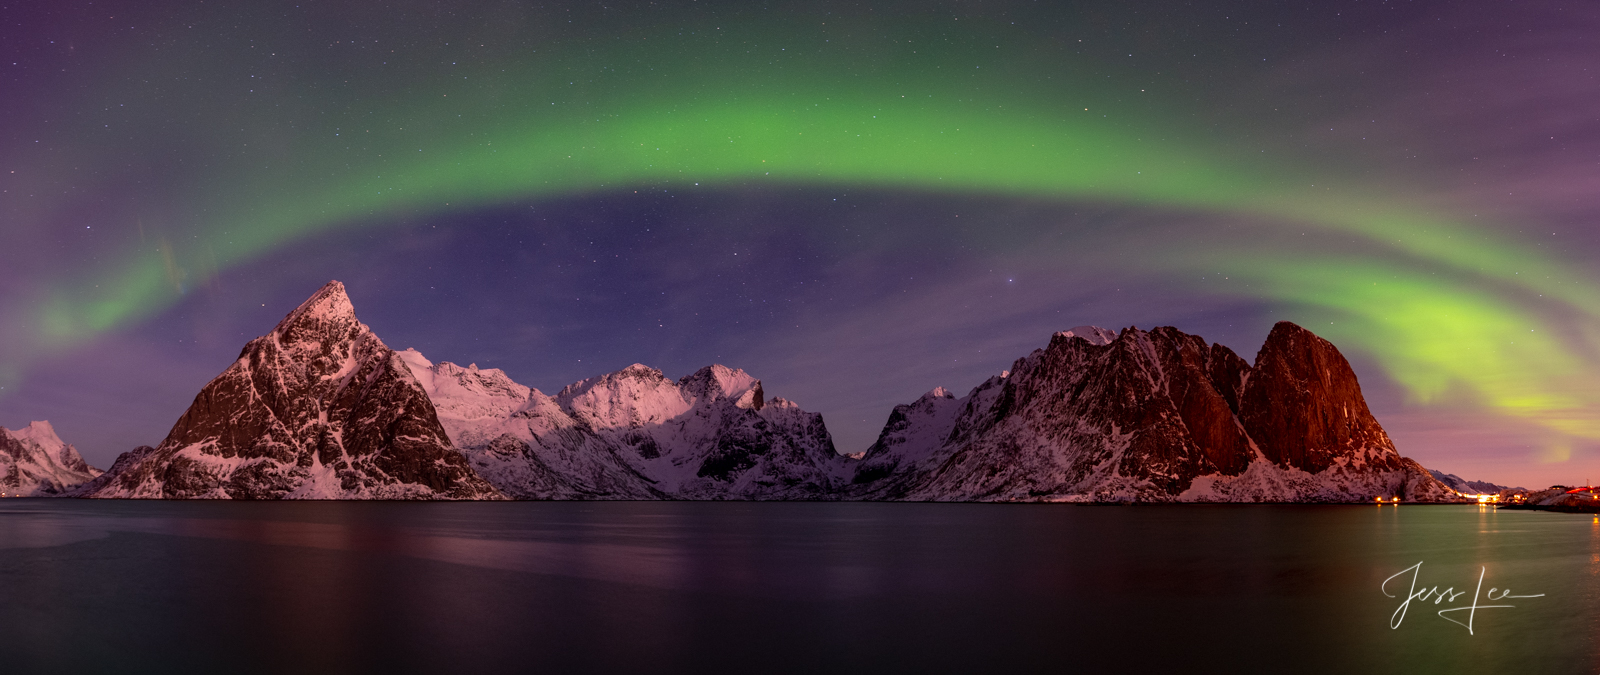 Limited Edition of 50 Exclusive high-resolution Museum Quality Fine Art Prints of the Norway Night Sky. Photos copyright © Jess...